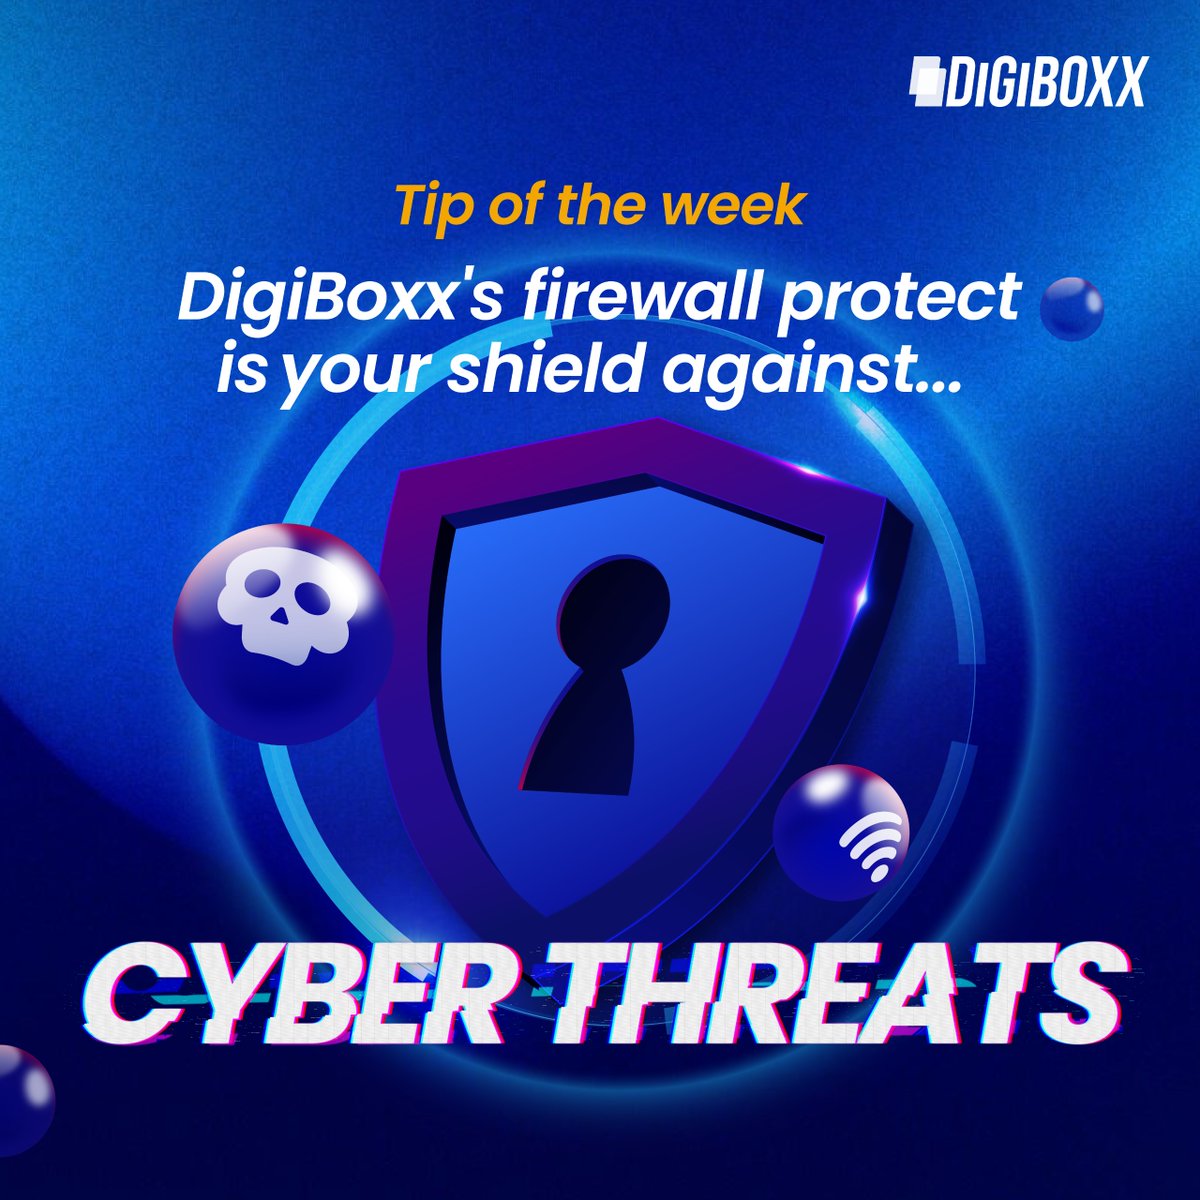 Safeguard your sensitive data with our robust security feature. Stay protected, stay secure with DigiBoxx!

#DigiBoxx #CloudStorage #SecureStorage